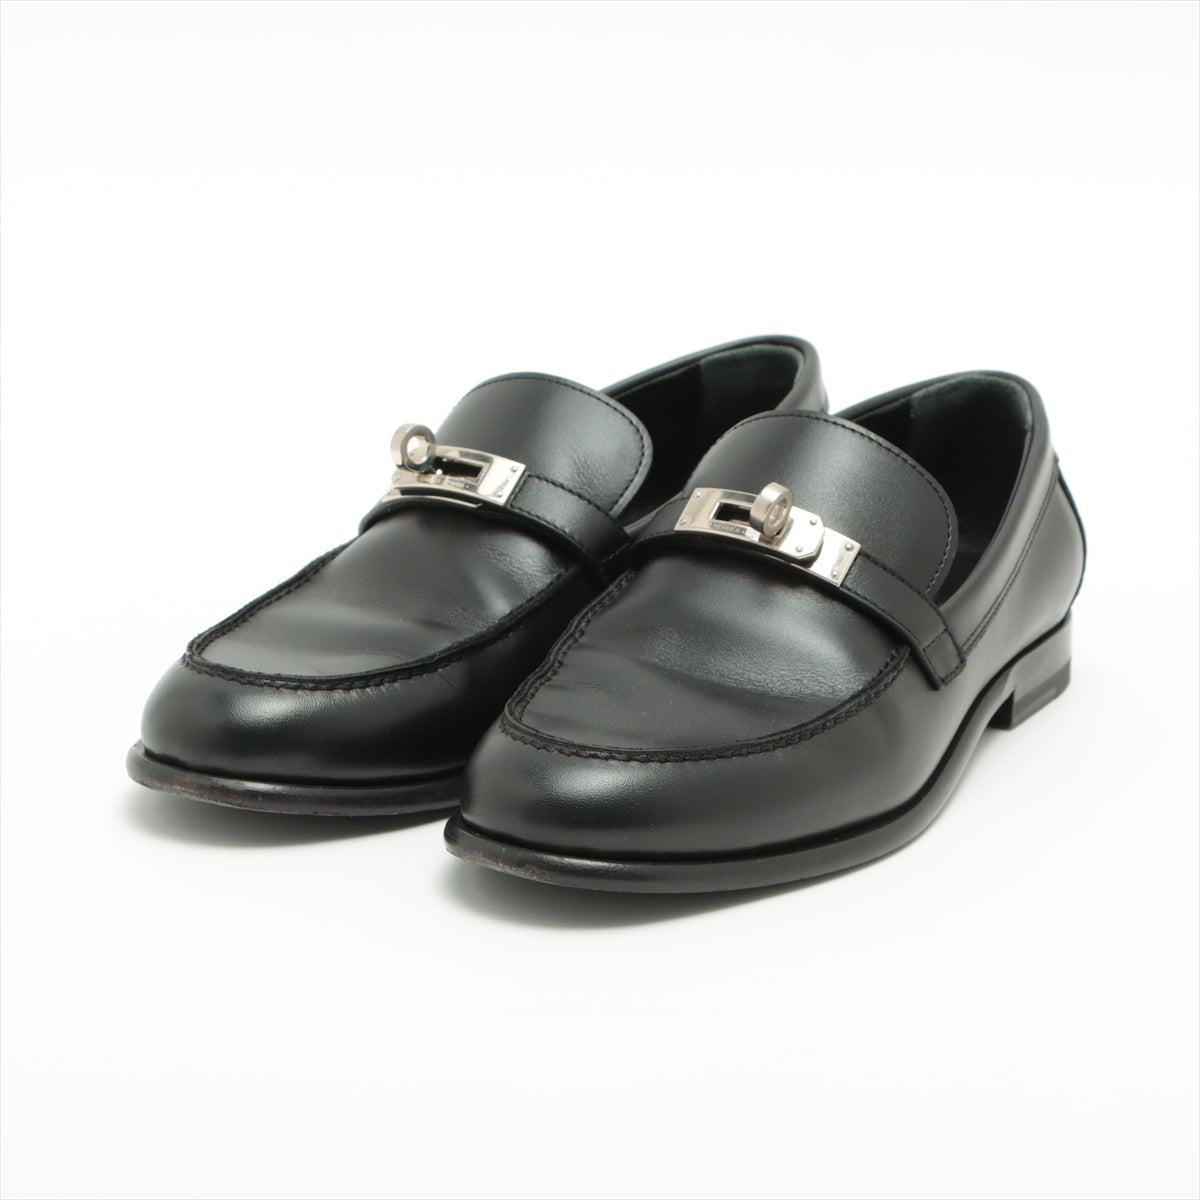 Hermès Kelly Leather Loafer 36 Ladies' Black WS212114Z There is a box